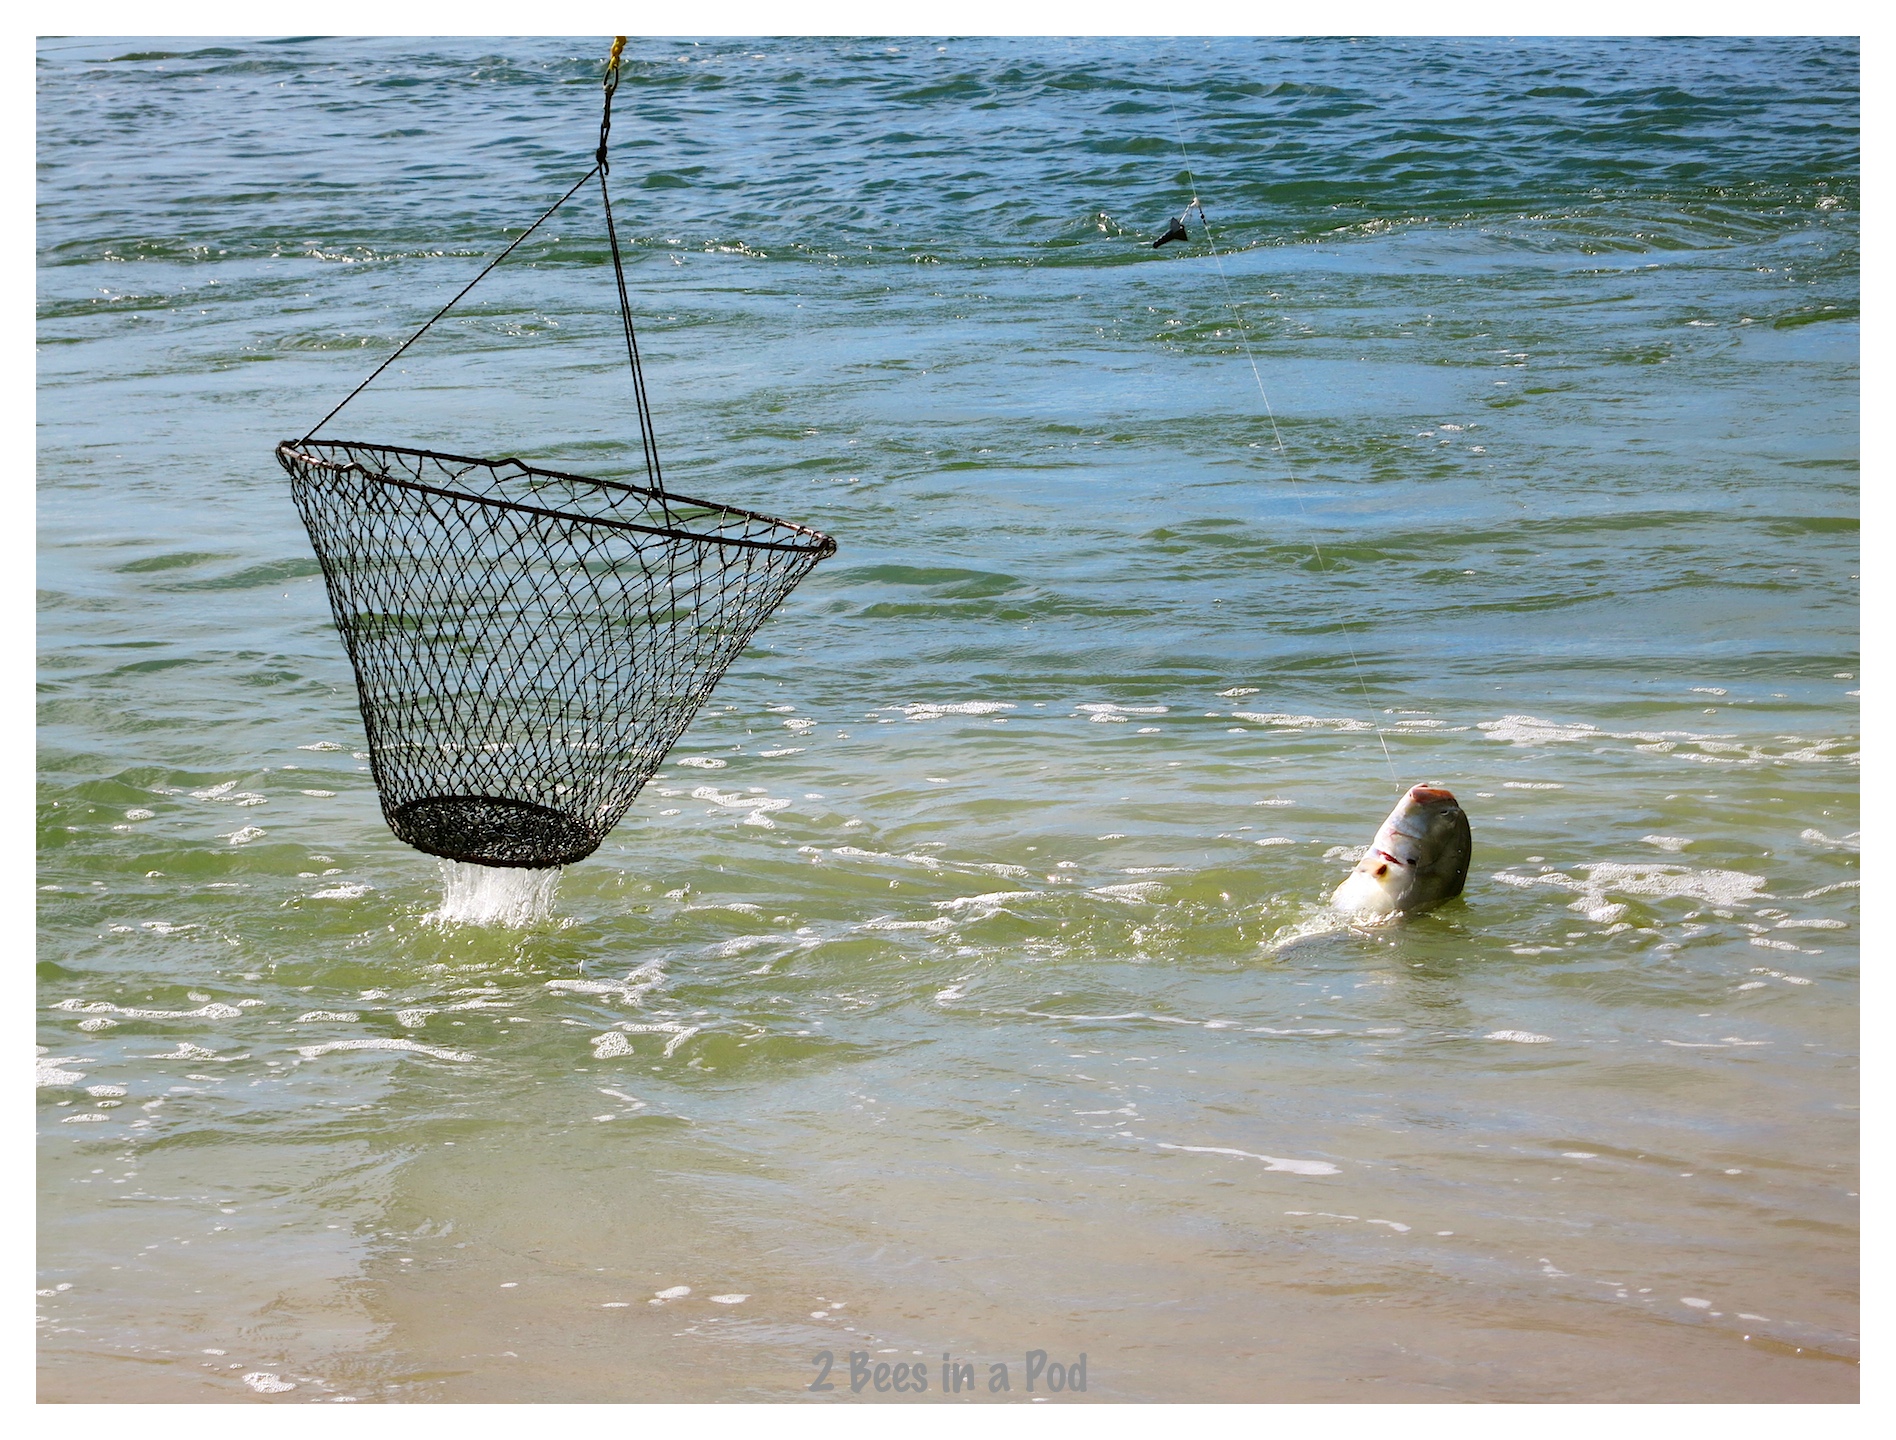 Caught in the act...Fisherman reeling in his catch from the bridge at Crescent Beach, Florida